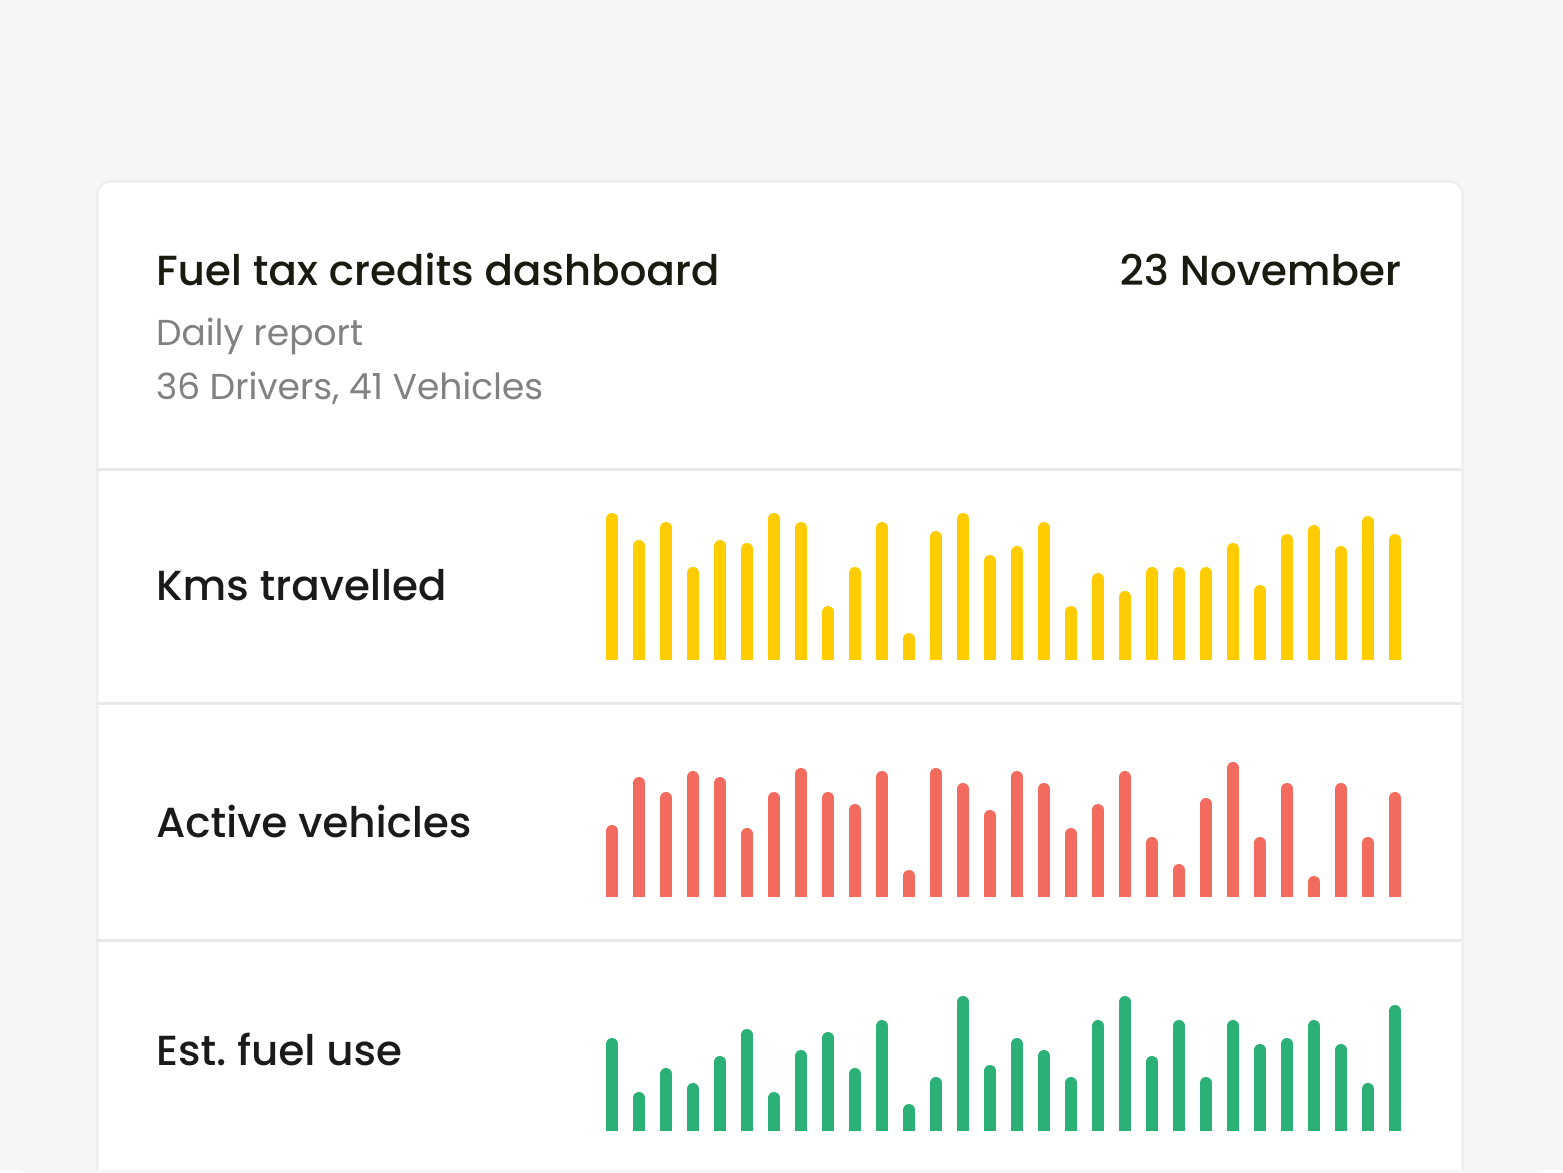 Inseego's fleet tracking software showcasing a fuel tax credit dashboard.